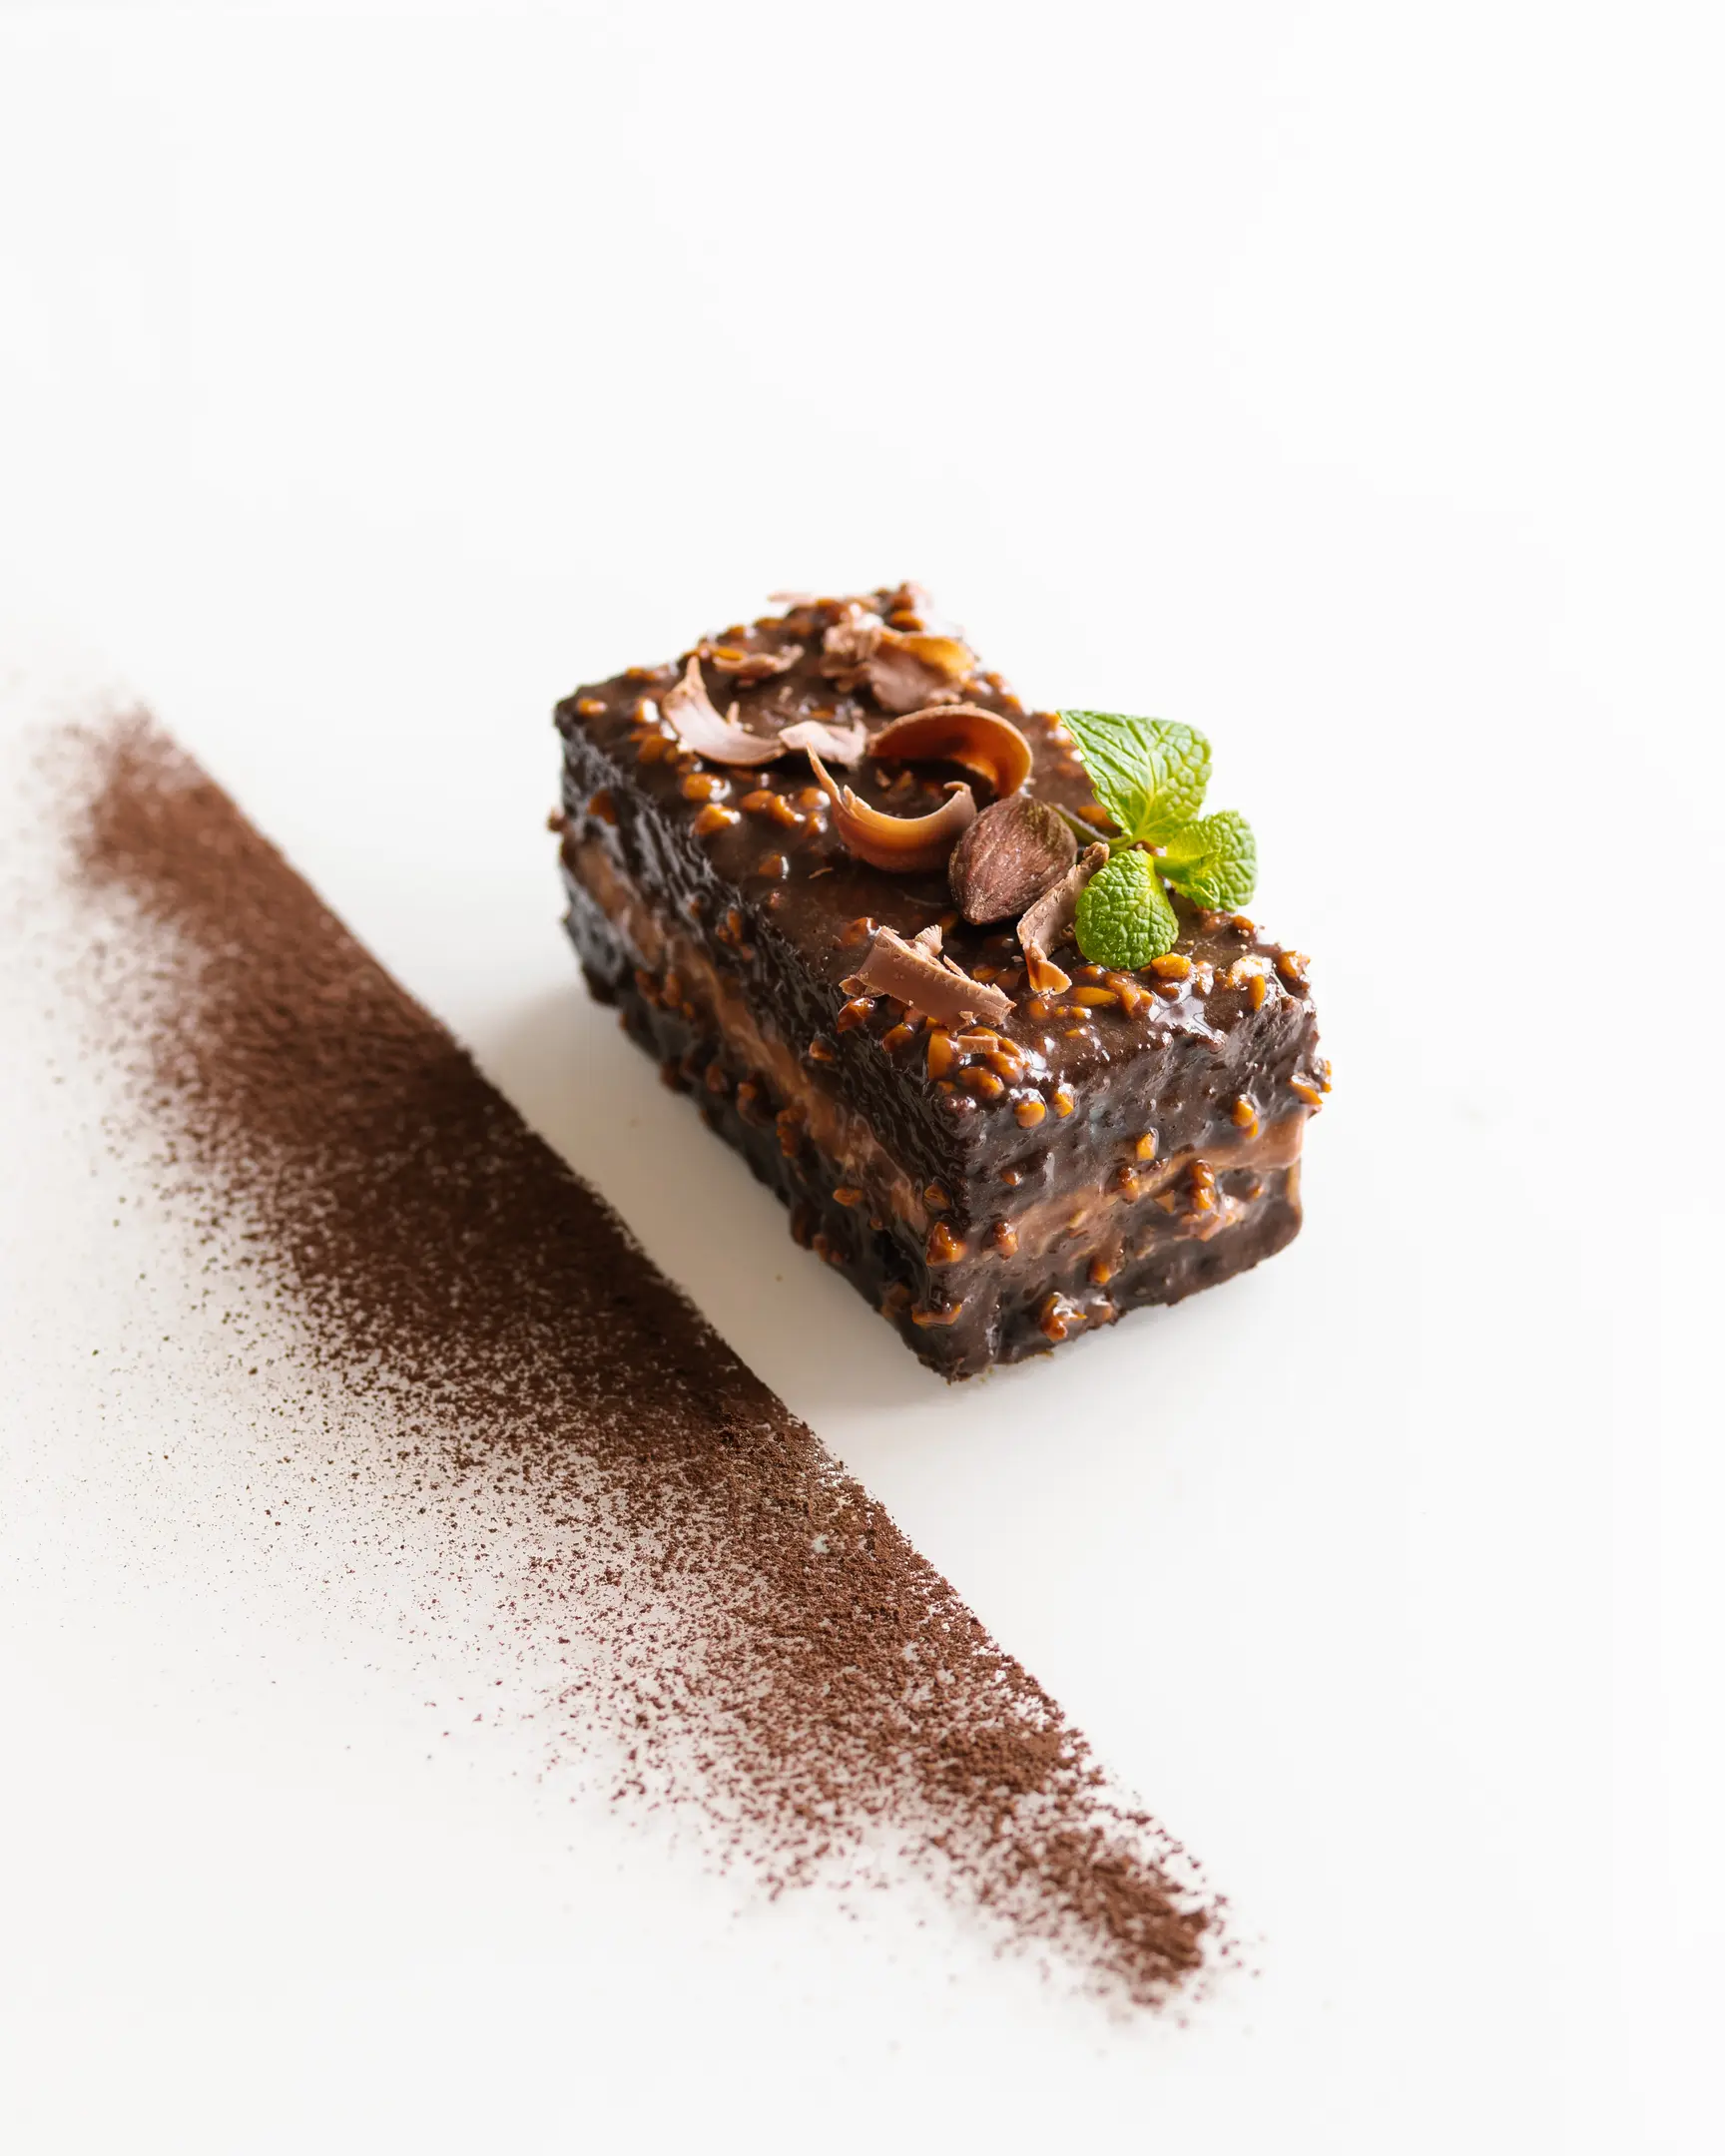 On a light glass surface lies a chocolate cake decorated with cacao On a light glass surface lies a chocolate cake decorated with cacao. To the left of it is a strip of cocoa. The dessert is decorated with almonds and mint.